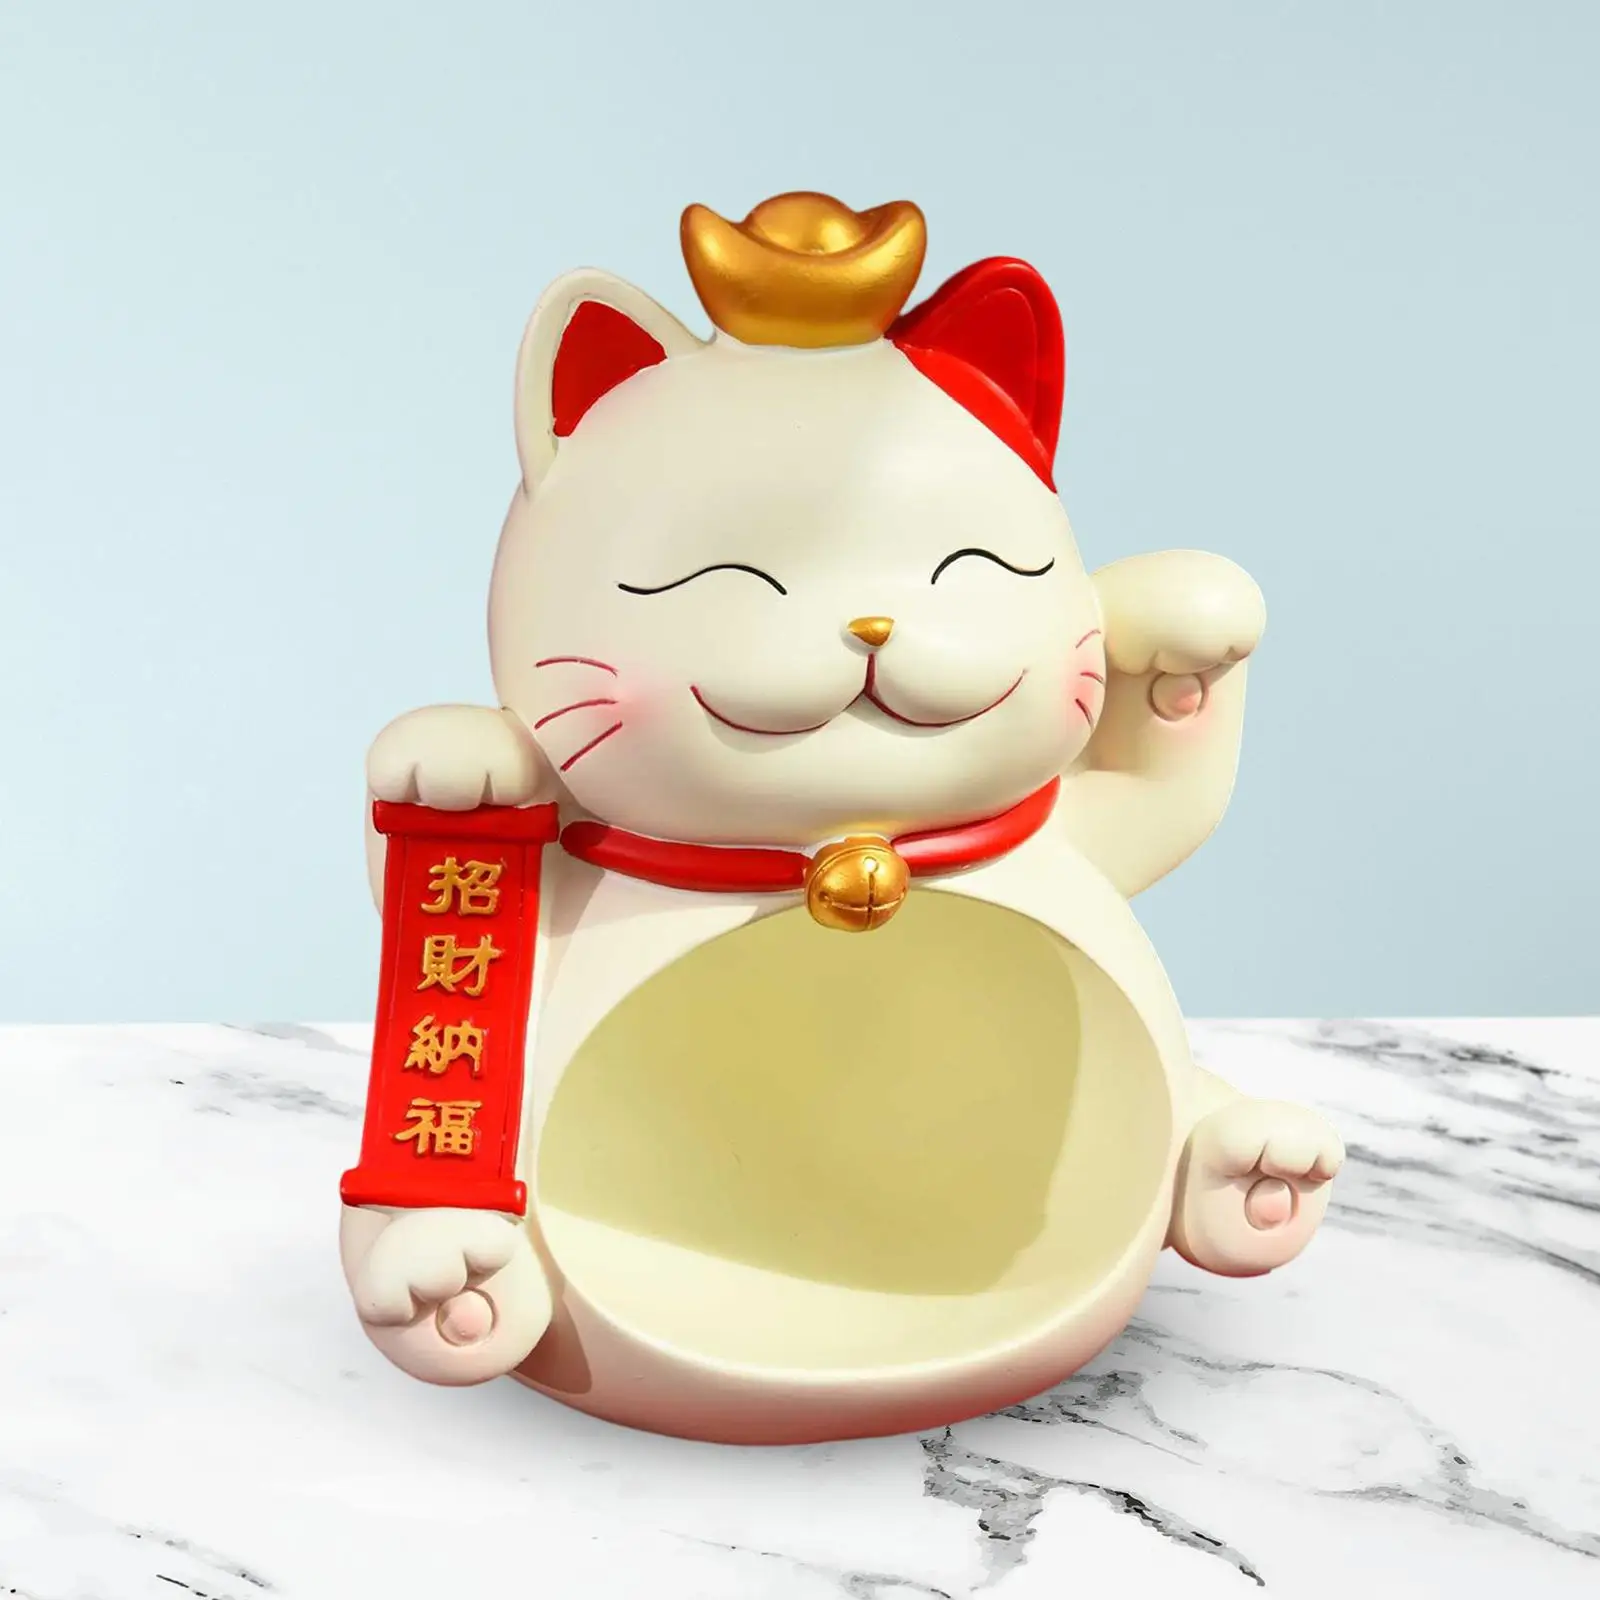 Multipurpose Cat Sculpture Storage Tray Desk Sundries Container Ornament Statue for Living Room Home Office Cabinet Decor